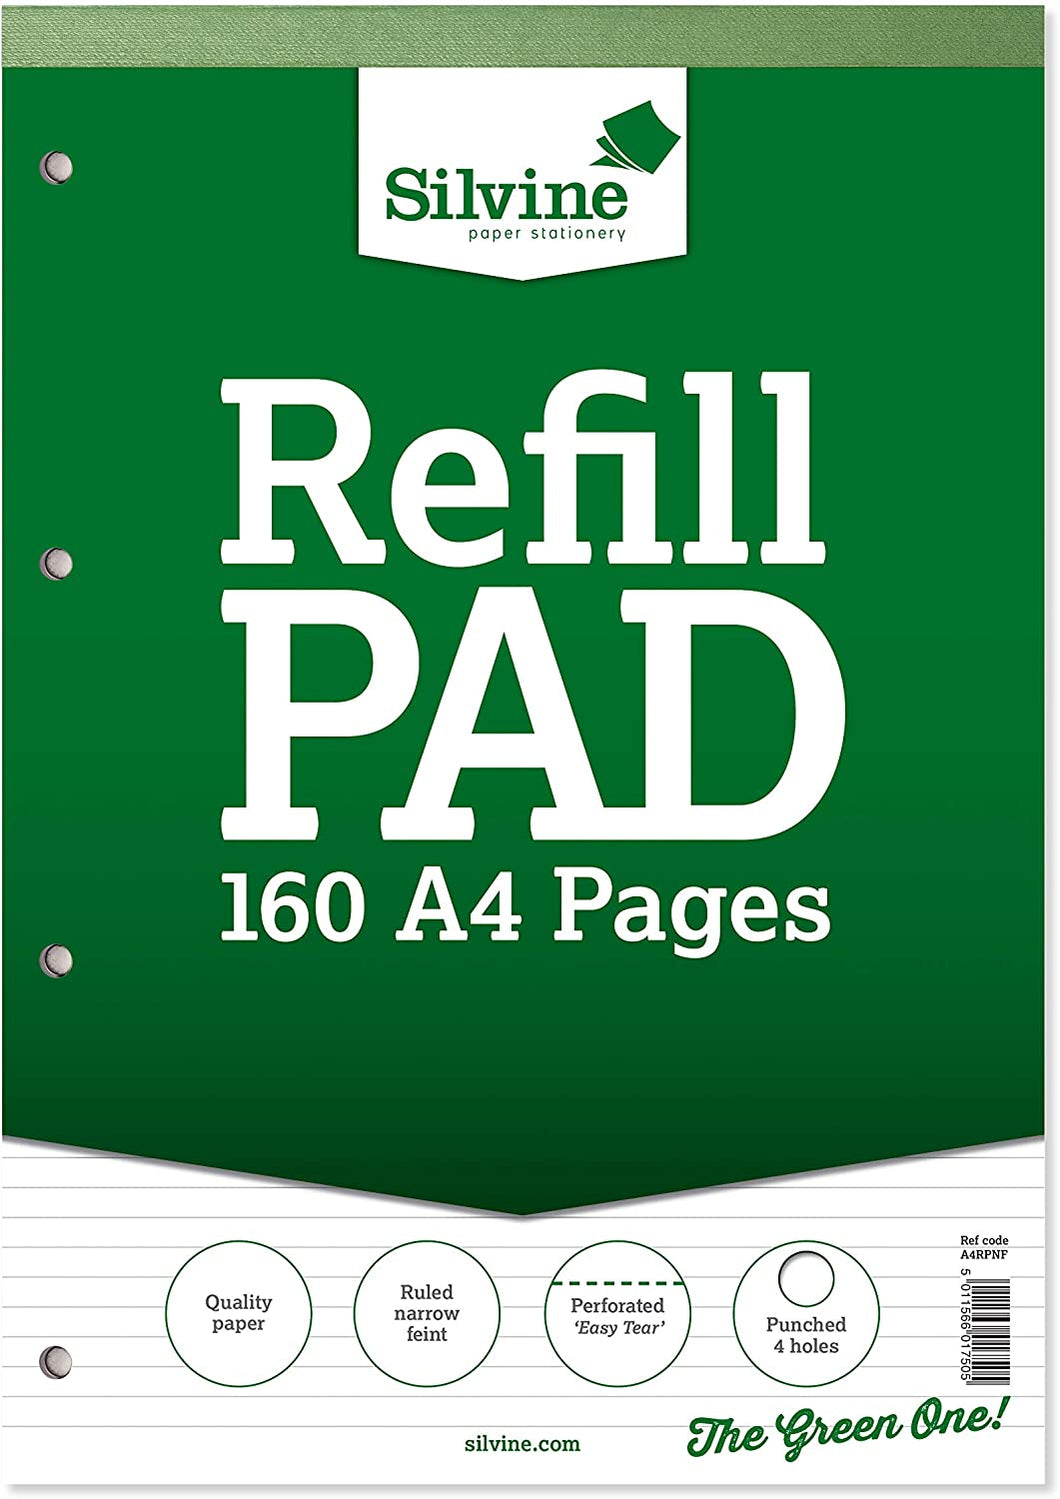 A4 Refill Pad 160 Pages Ruled Narrow Feint A4RPNF